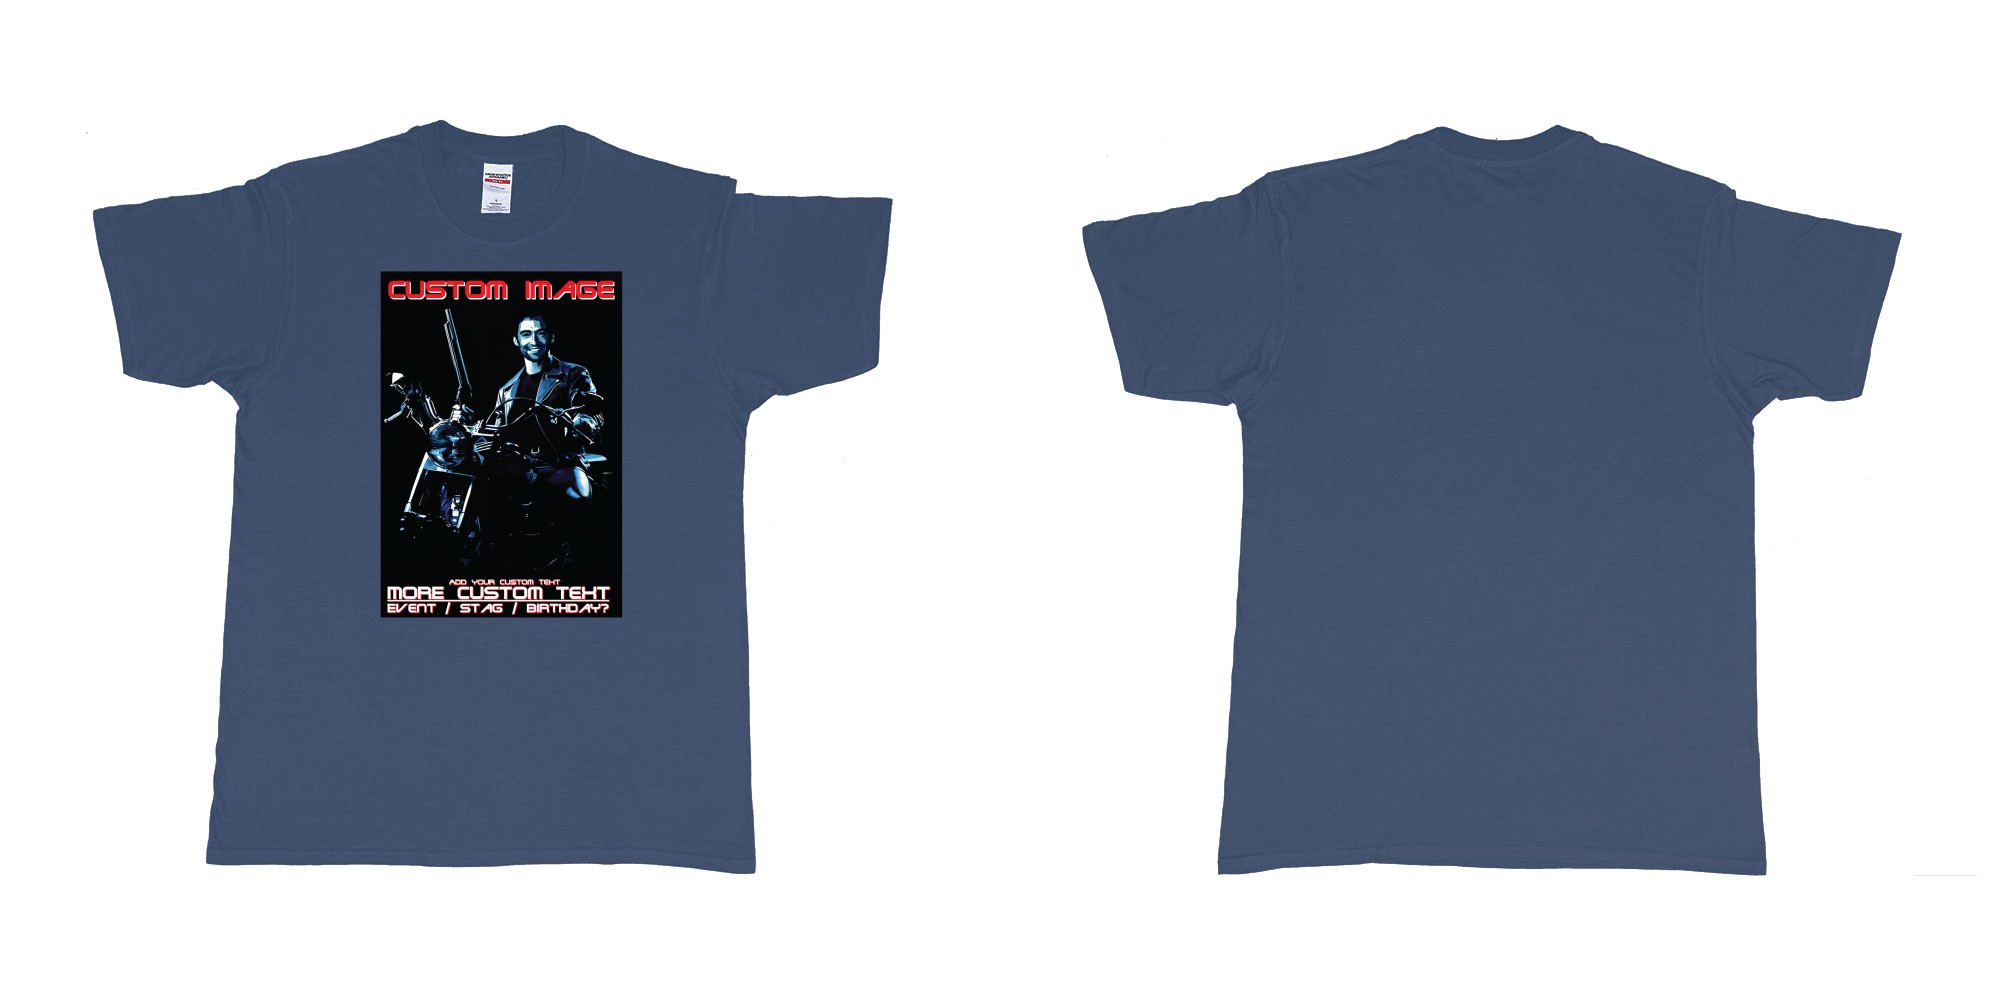 Custom tshirt design terminator 2 judgement day hugh jackman custom face in fabric color navy choice your own text made in Bali by The Pirate Way